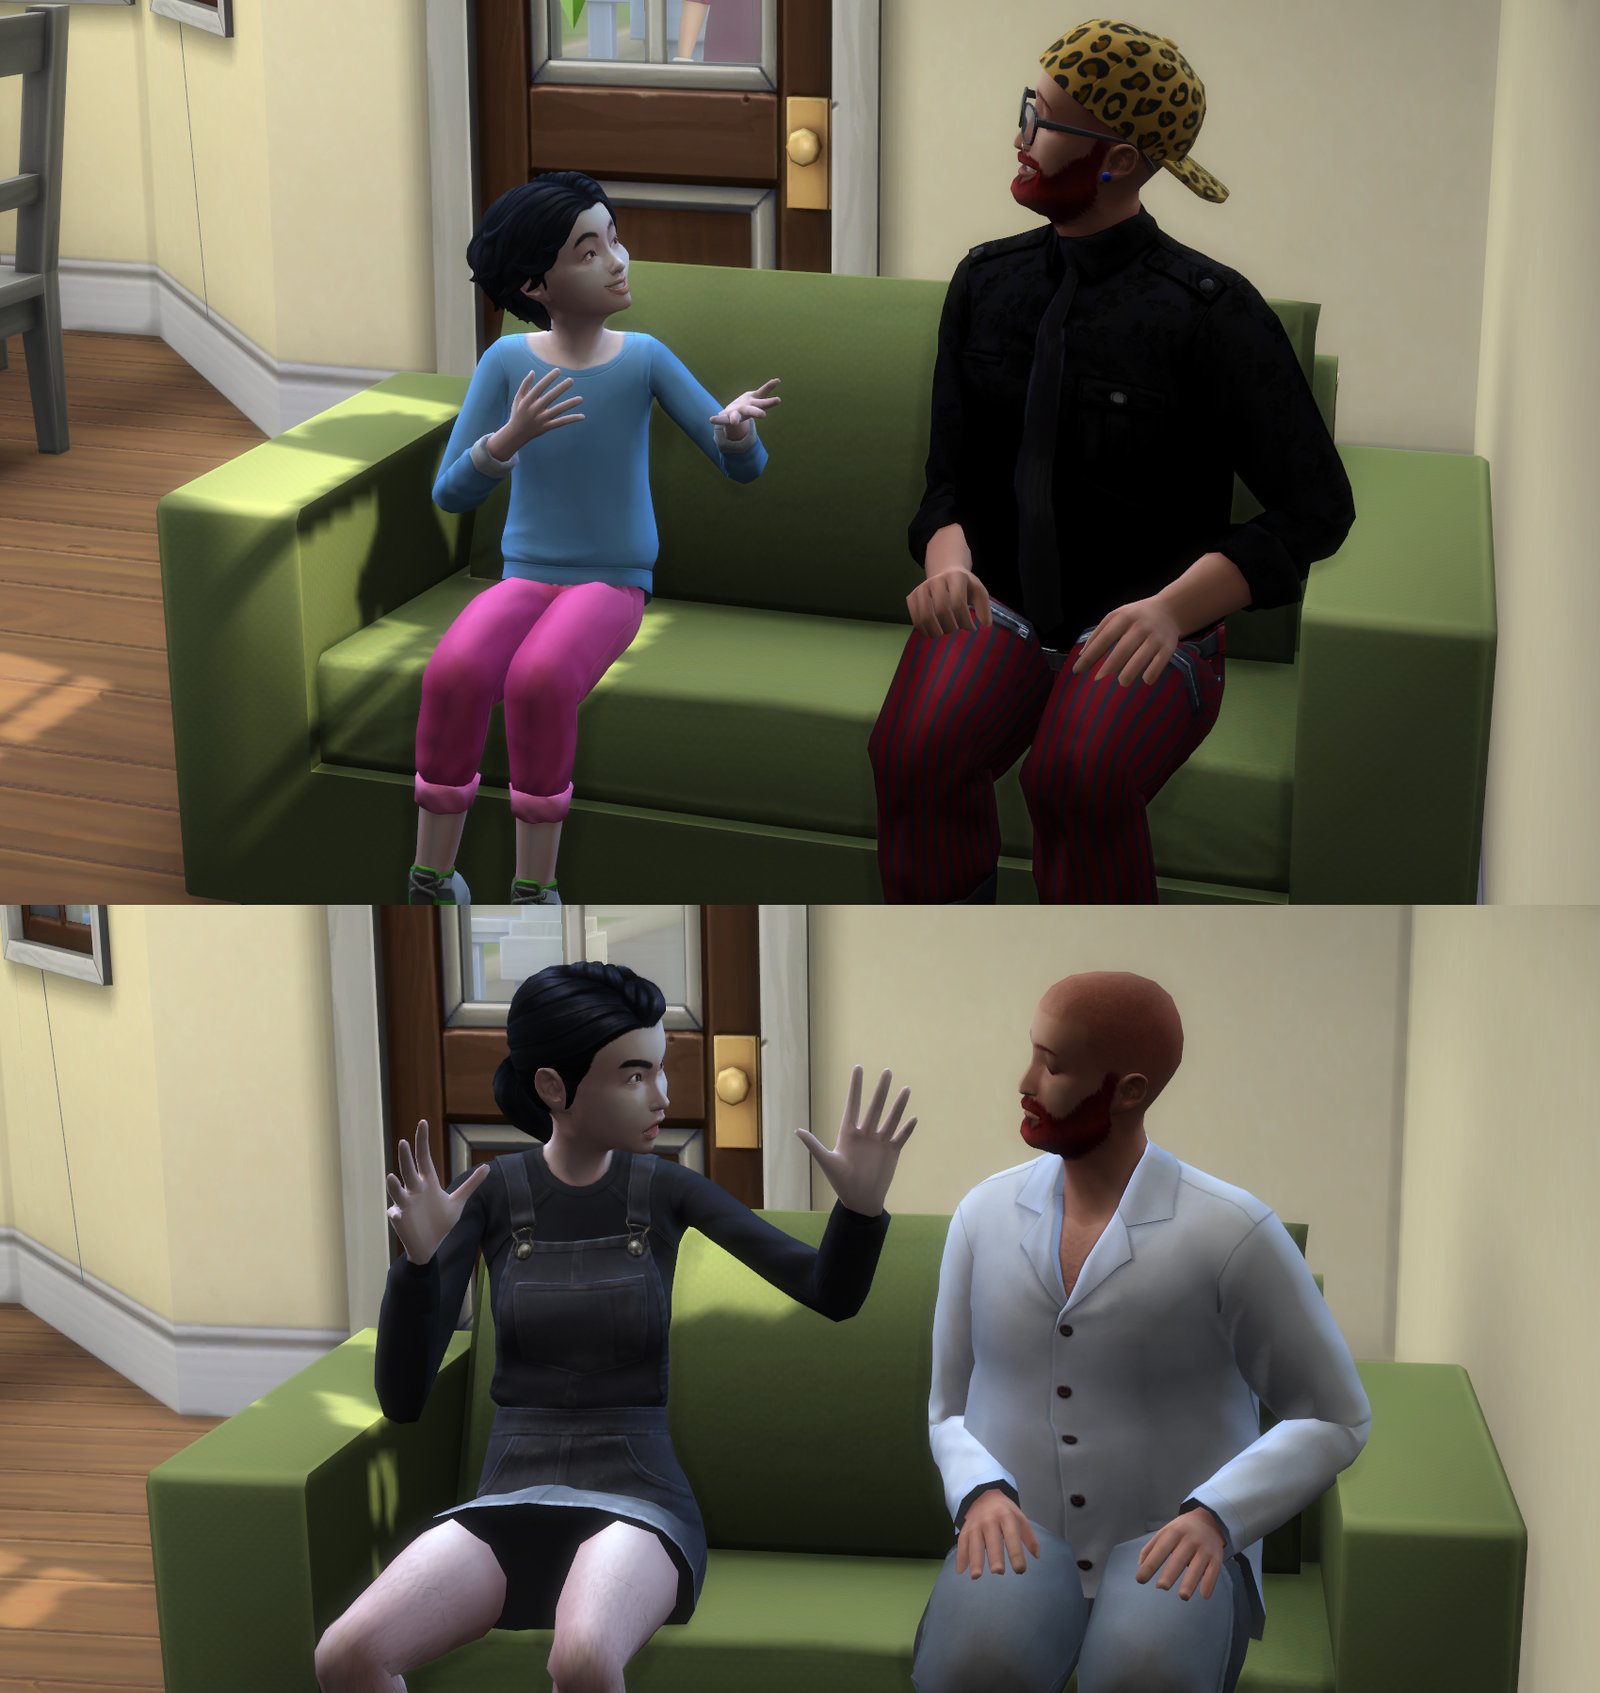 The Sims 4 characters talking on a couch